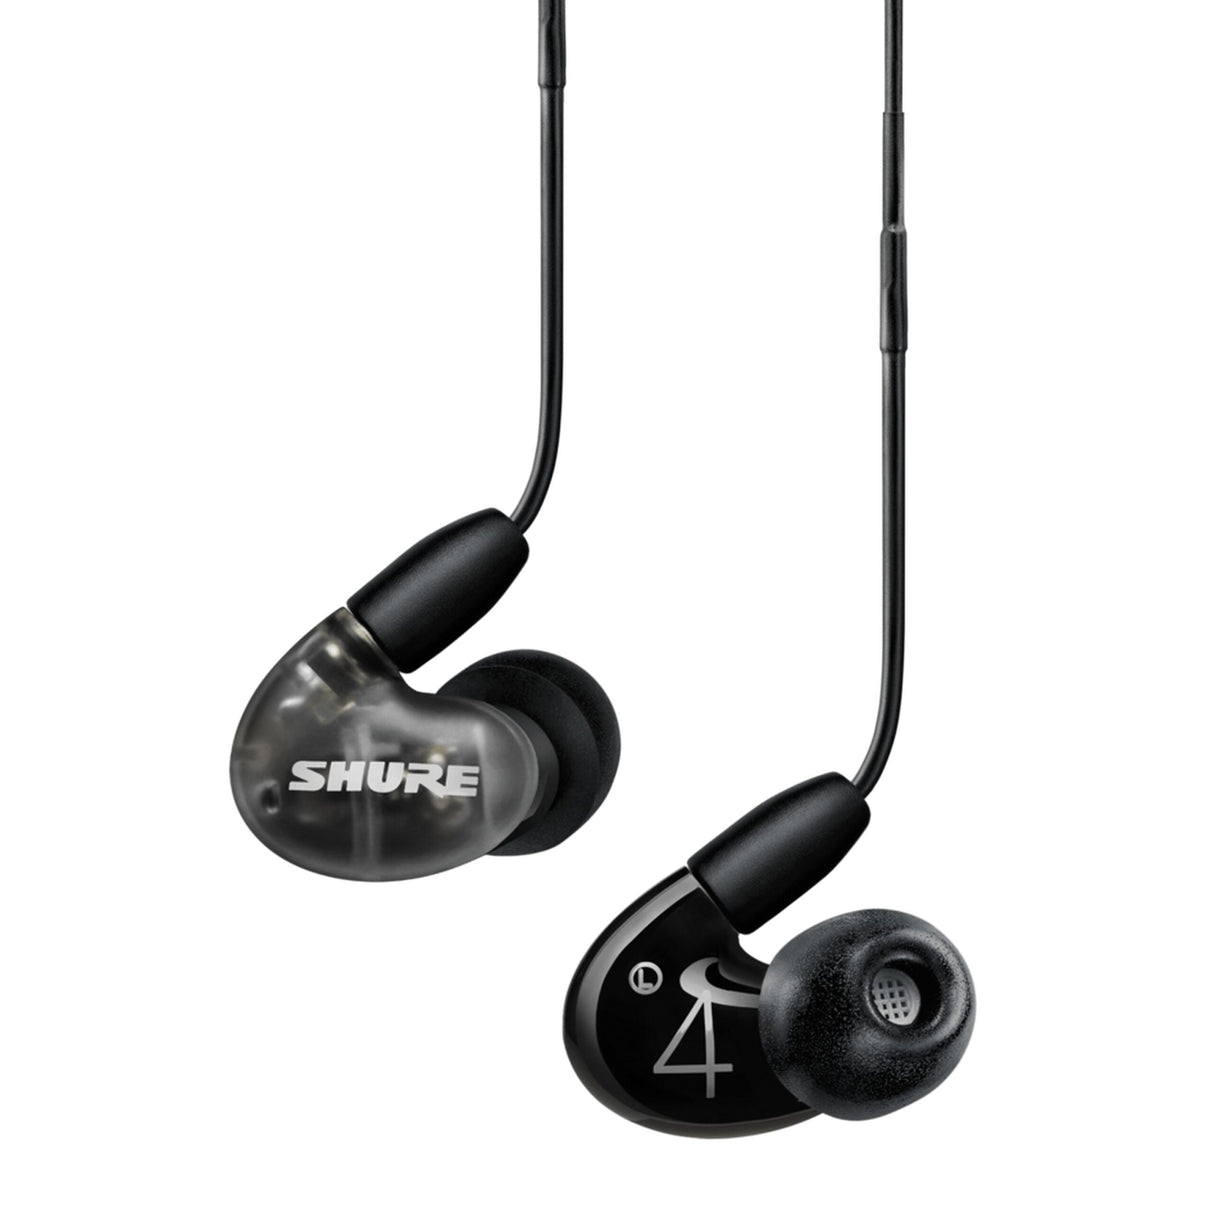 Shure AONIC 4 SE42HYBK+UNI Wired Sound Isolating In-Ear Headphone, Black/Gray (Used)